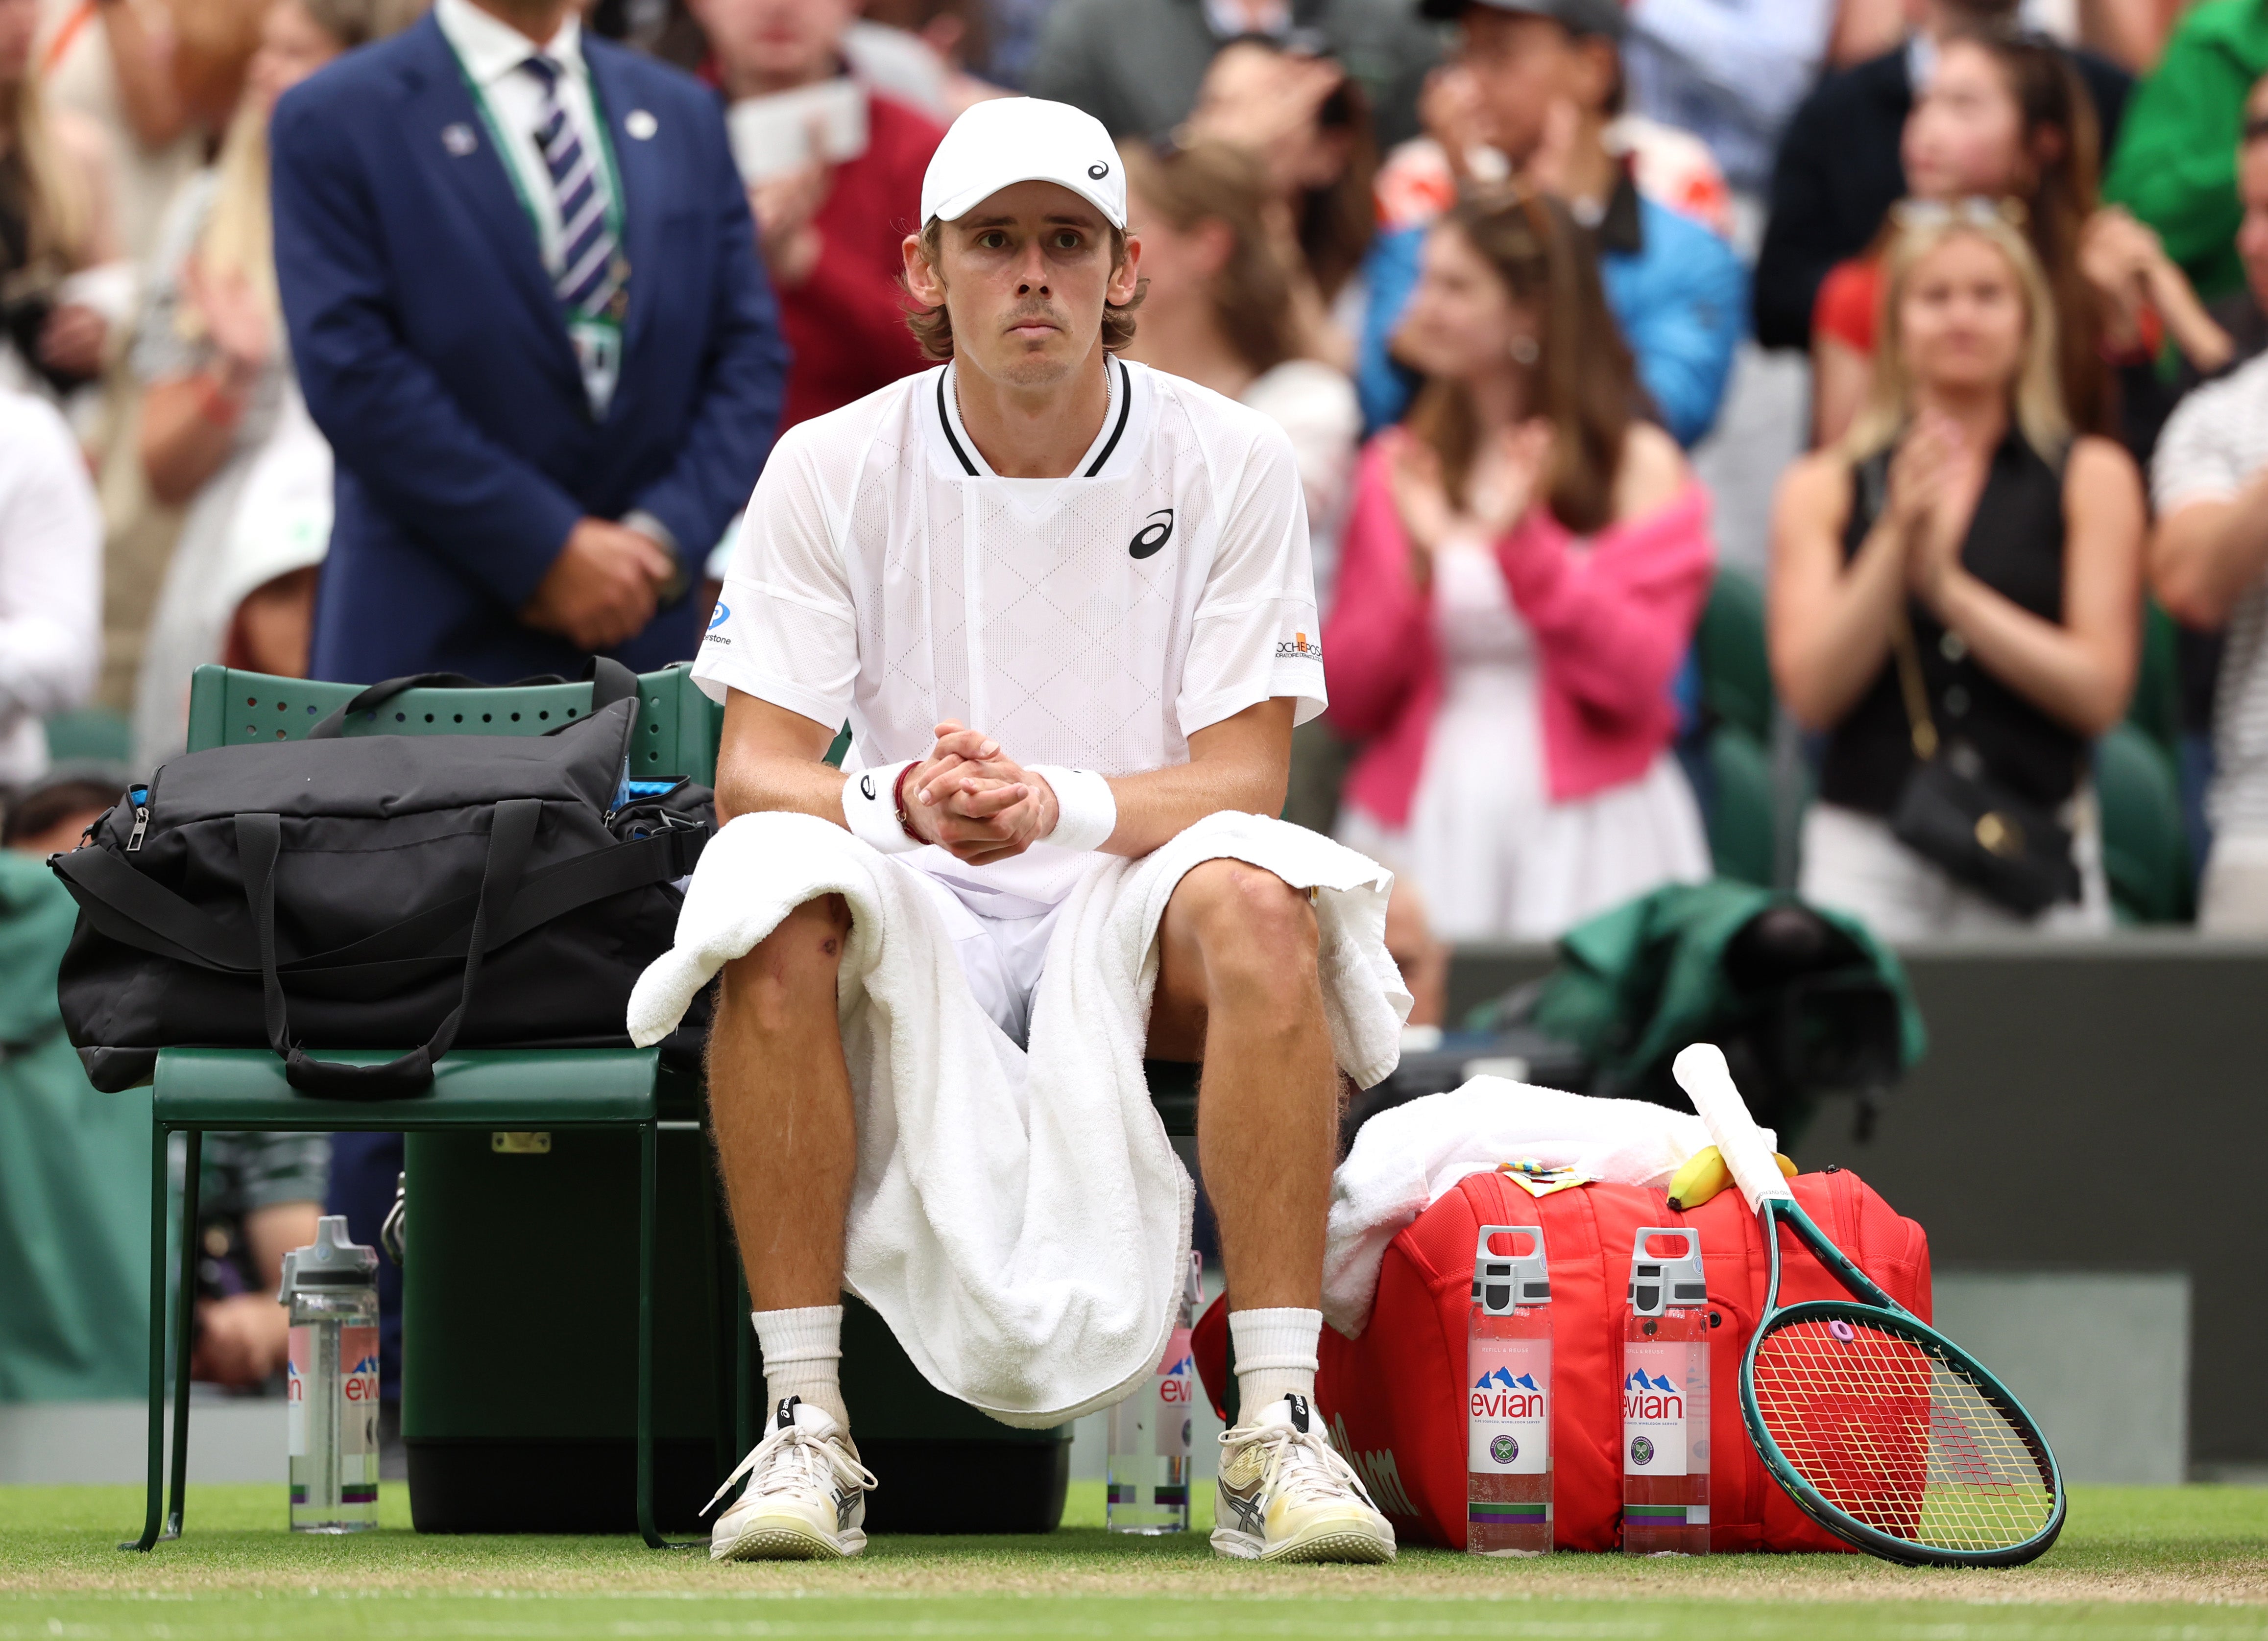 Alex de Minaur has pulled out of Wimbledon due to a hip injury